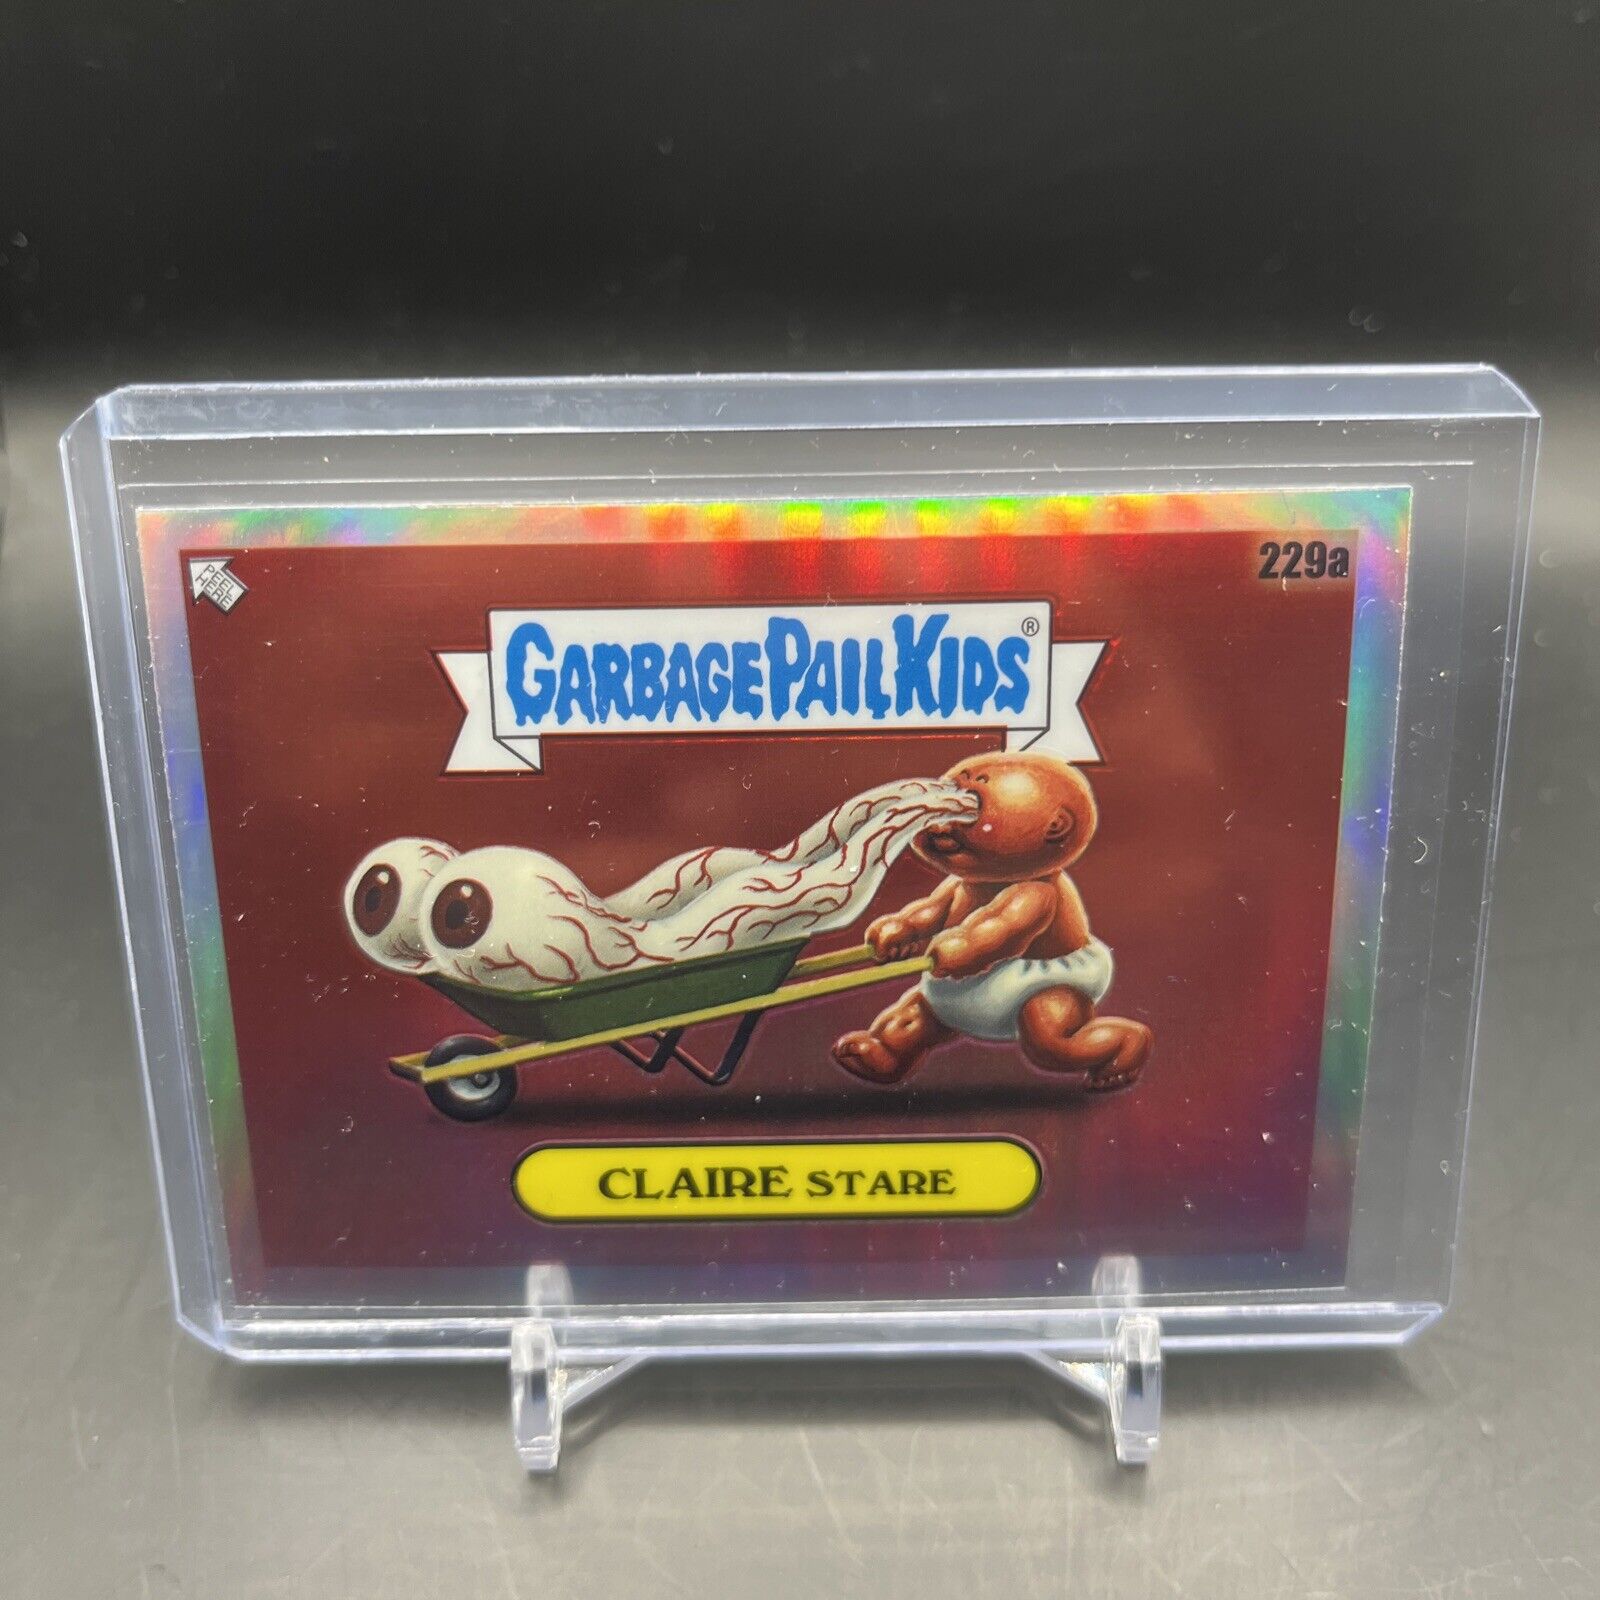 2023 Topps Chrome Garbage Pail Kids Claire Stare Silver Refractor #229a